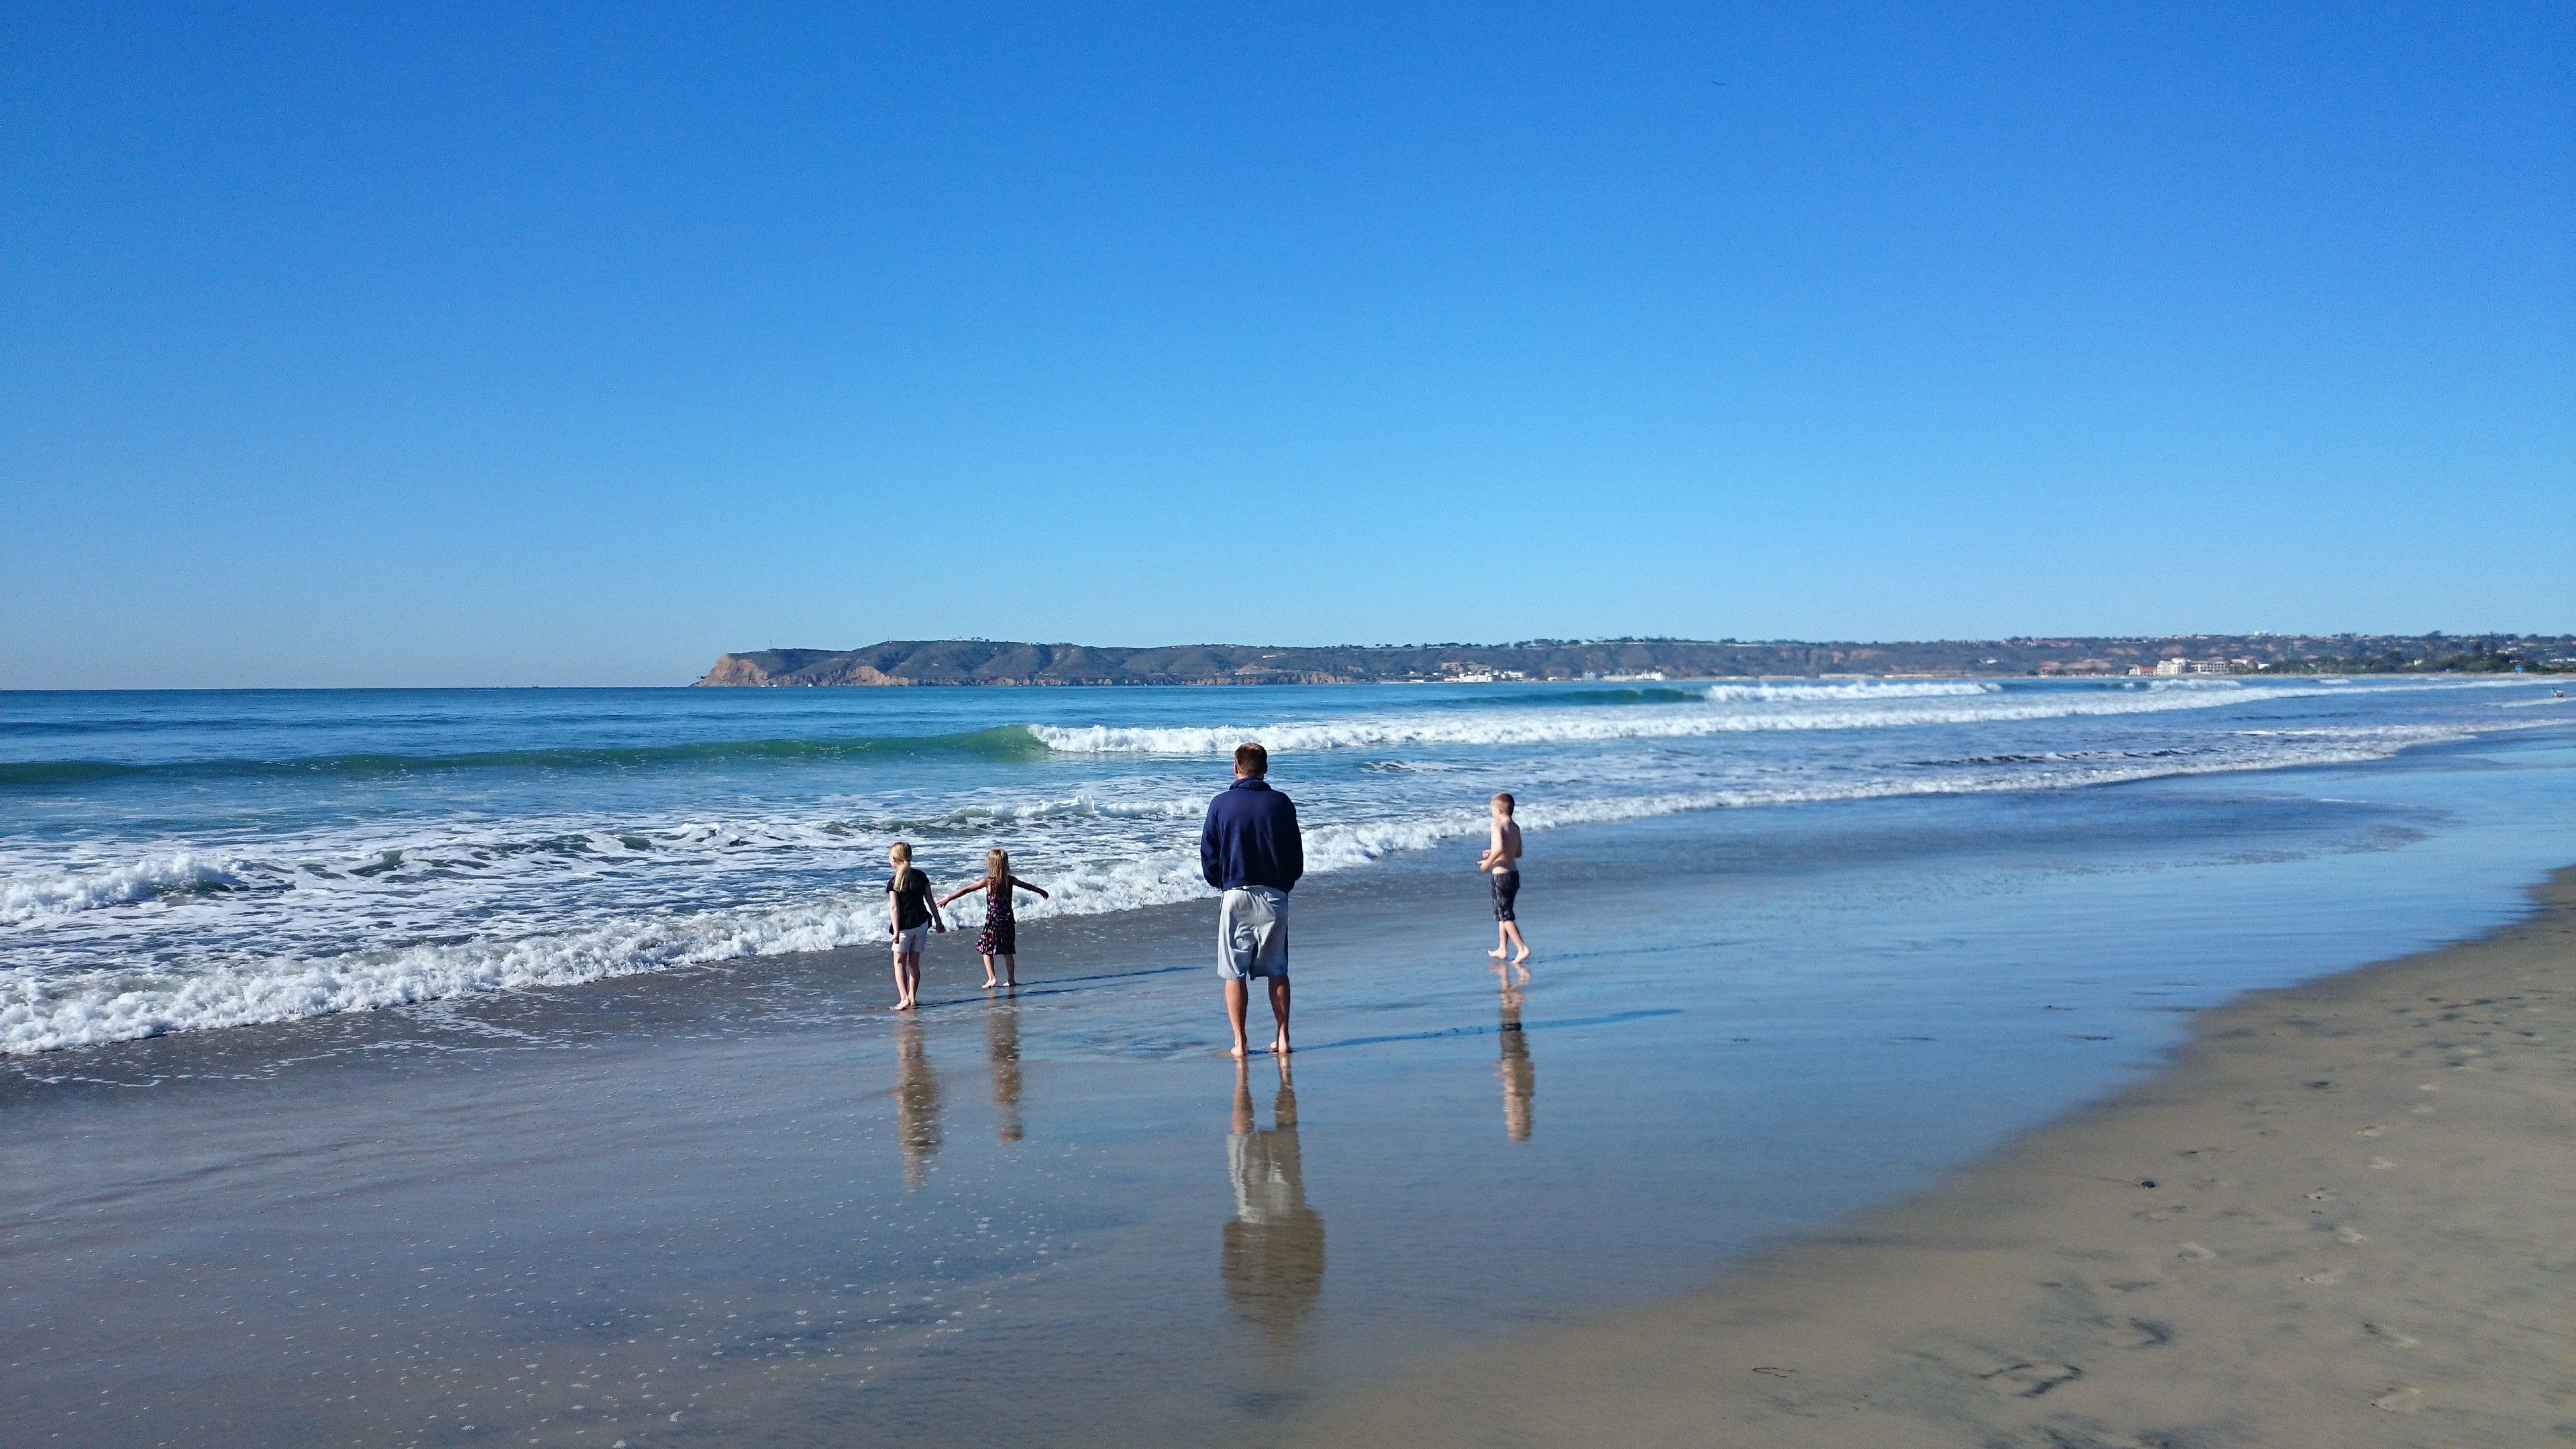 The most beautiful beaches of San Diego - The most beautiful beaches of San Diego